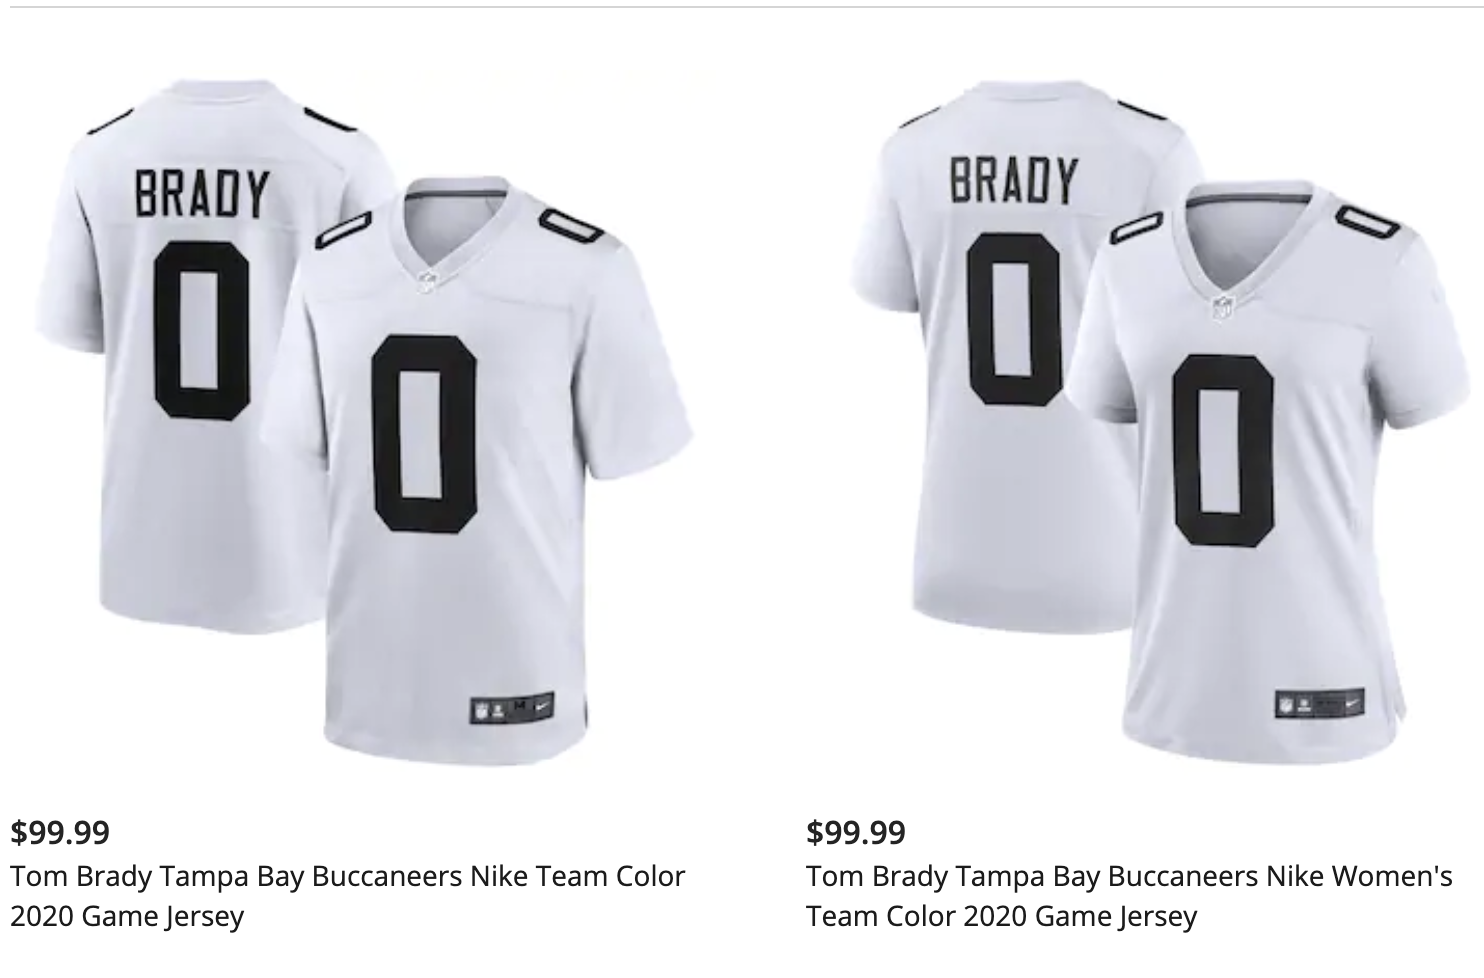 Want a Buccaneers Tom Brady jersey? Here's why you should wait on